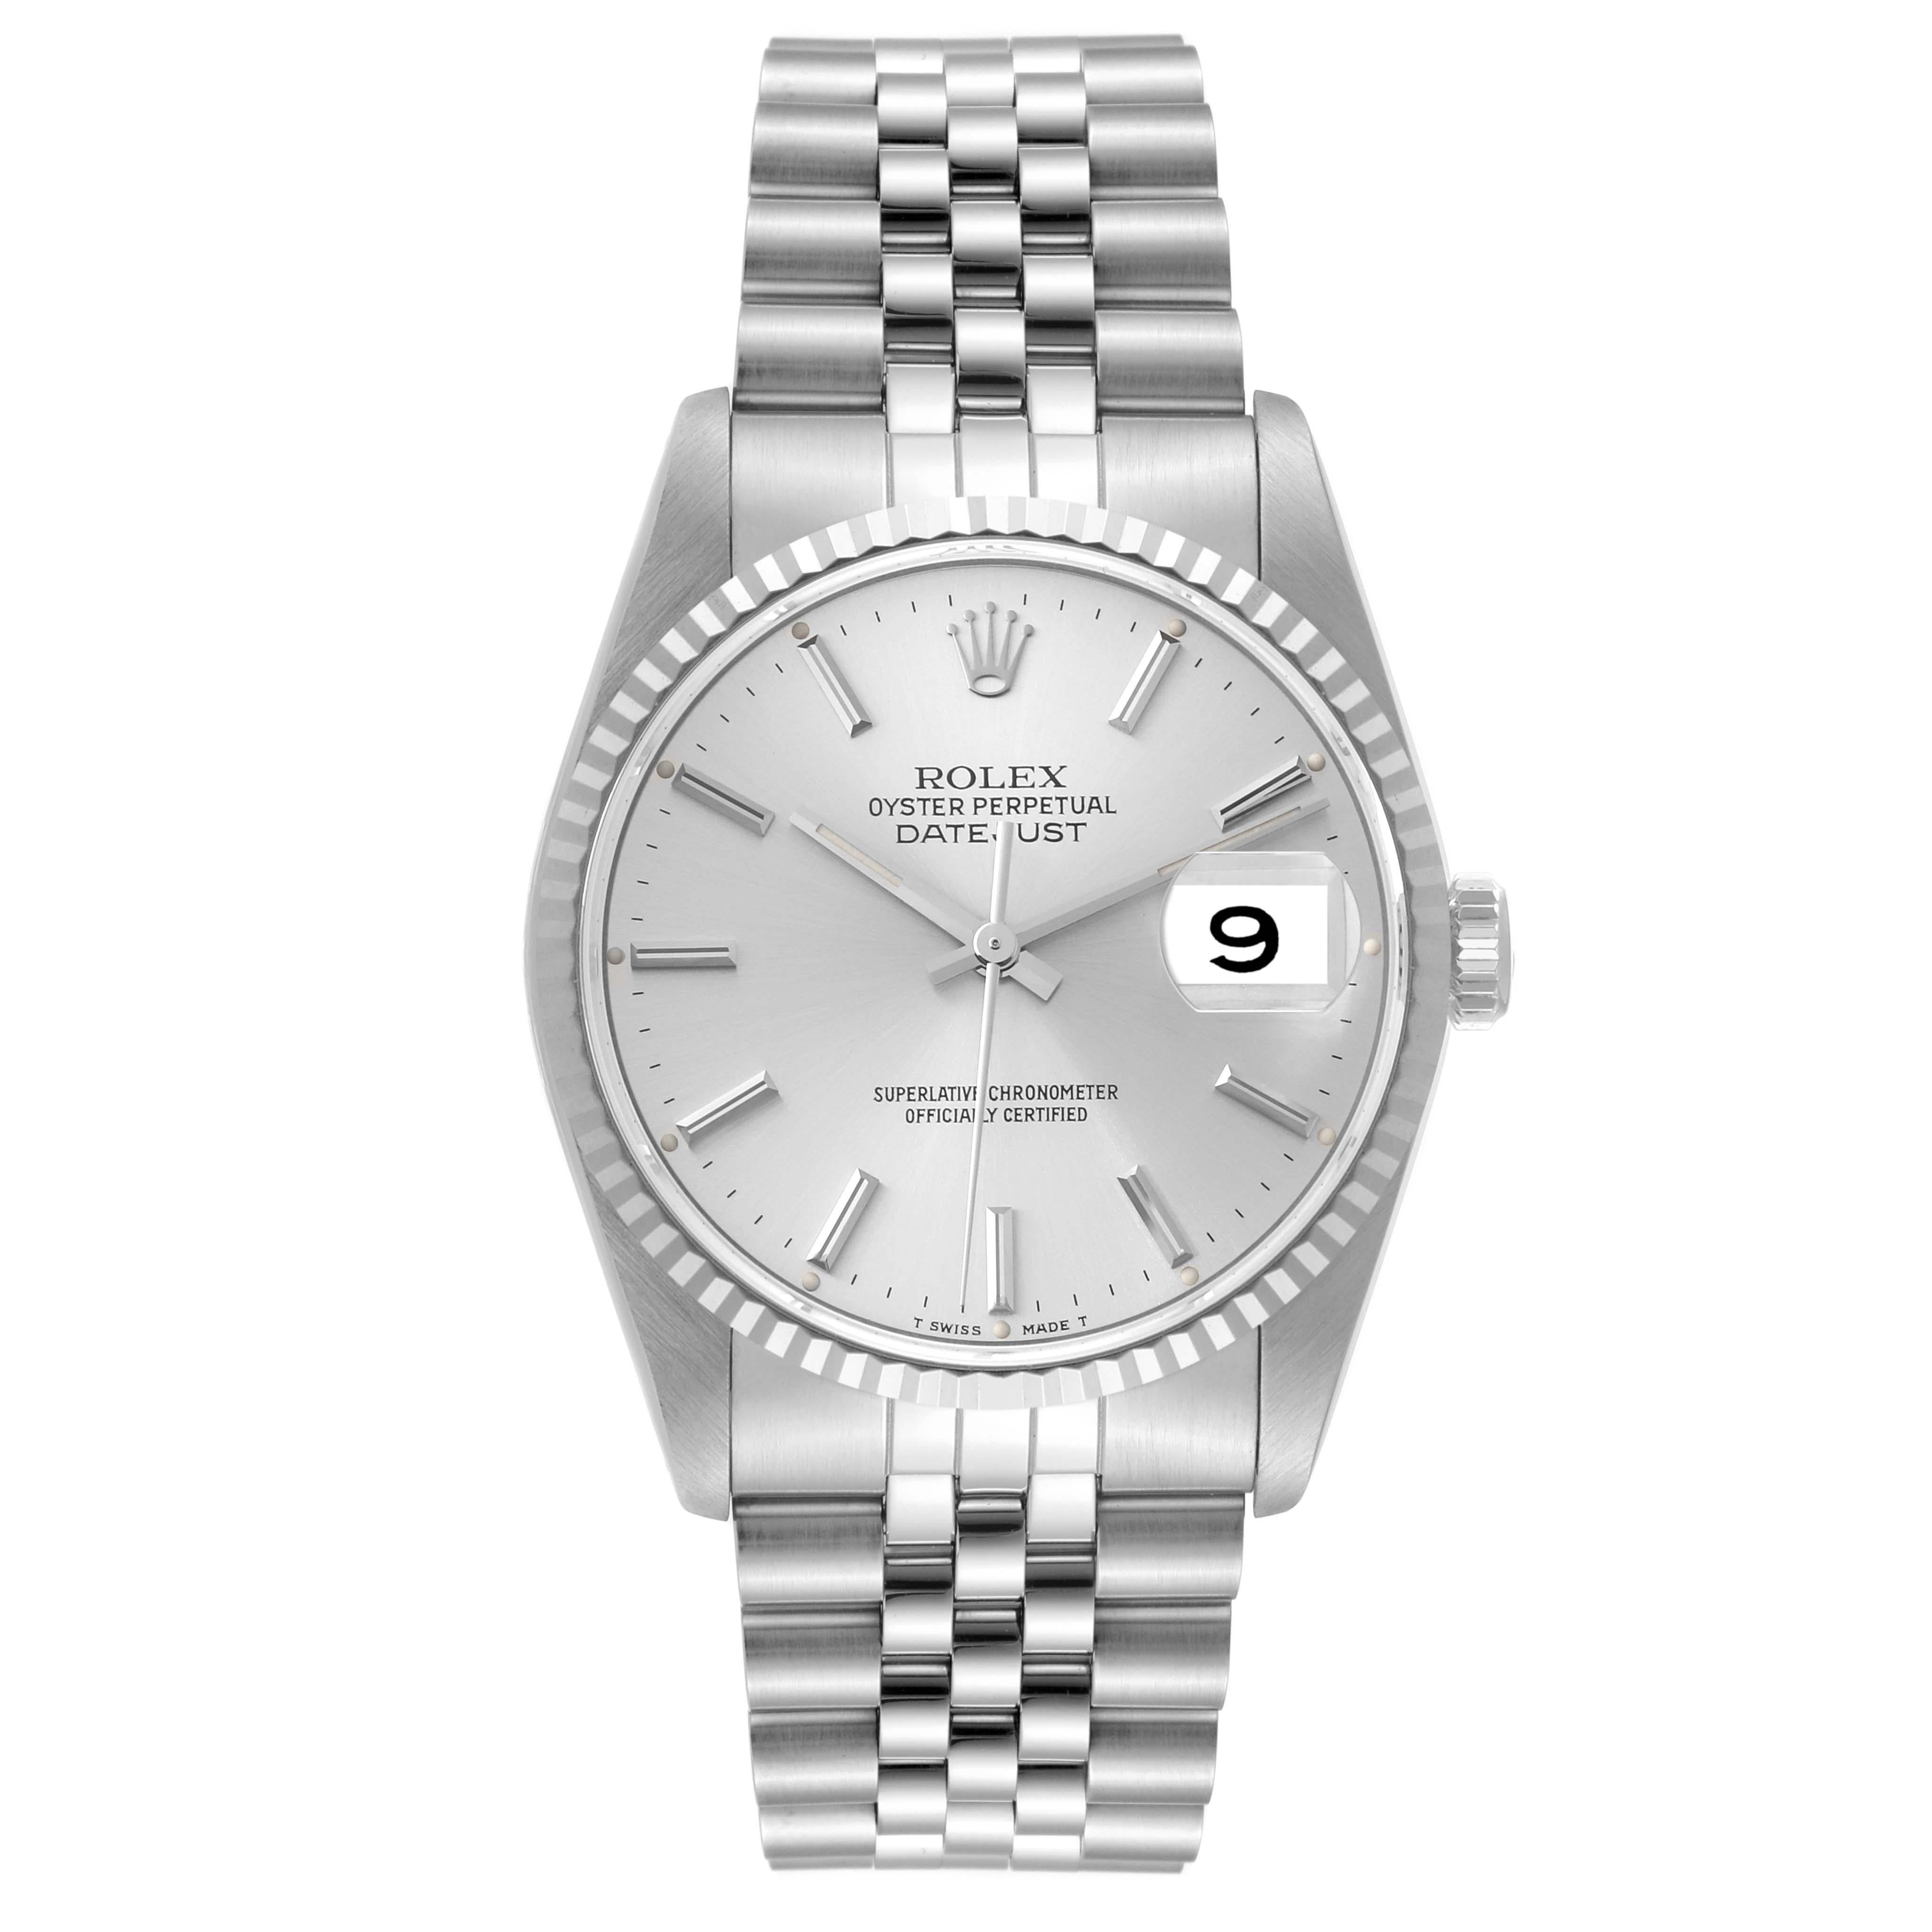 Rolex Datejust Silver Dial Steel White Gold Mens Watch 16234 In Excellent Condition For Sale In Atlanta, GA